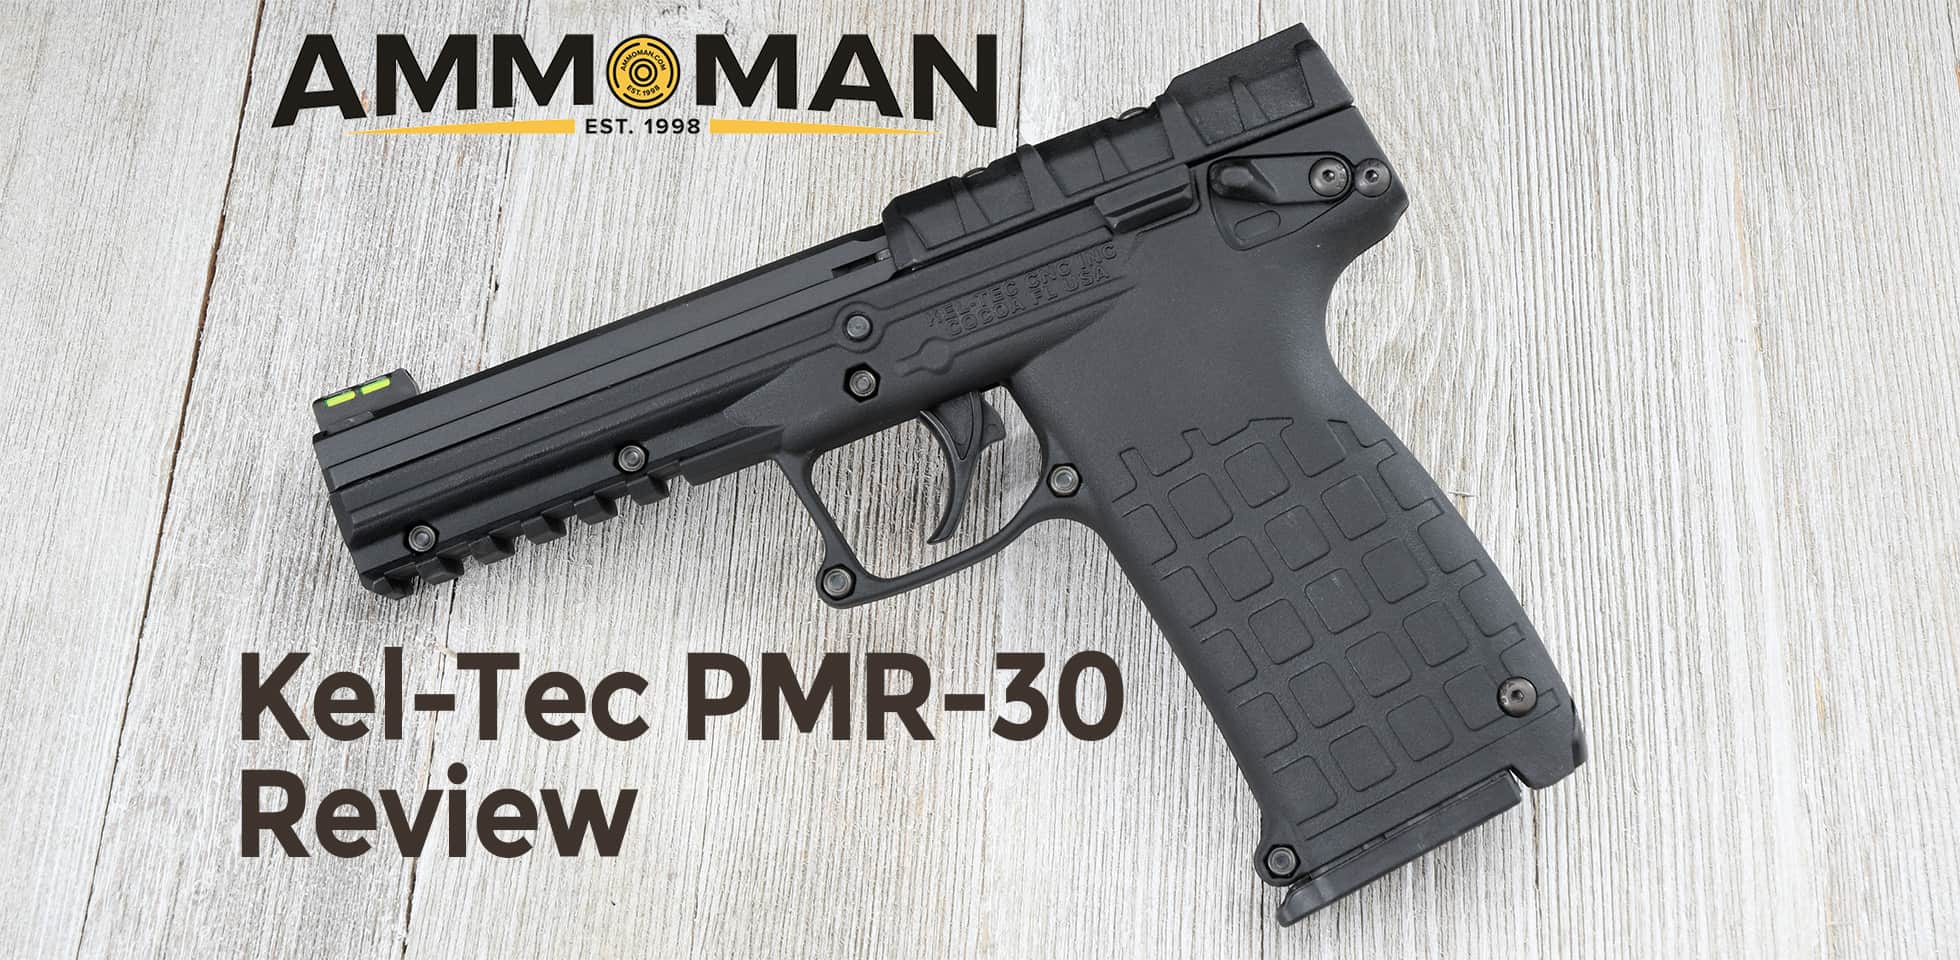 Pmr30 review